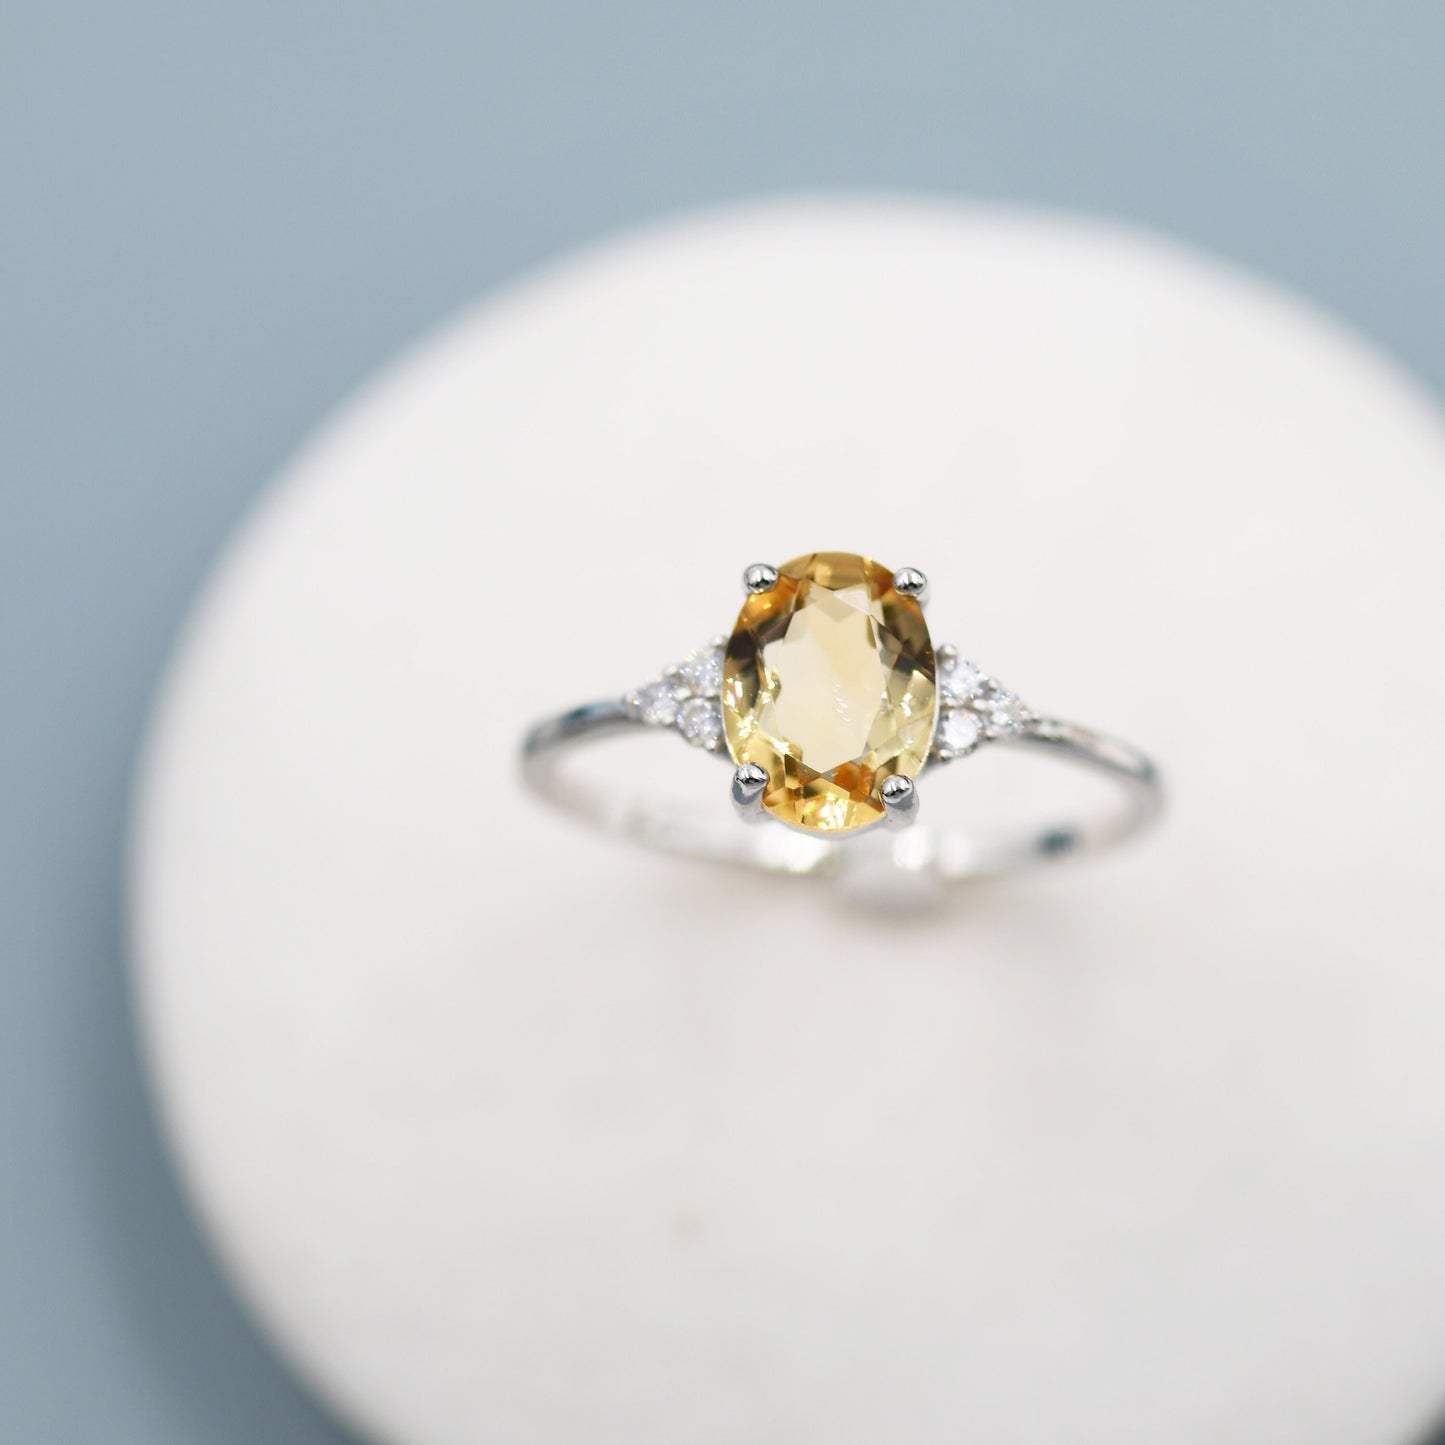 Genuine Citrine Oval Ring in Sterling Silver, Natural Yellow Citrine Ring, Three CZ,  Vintage Inspired Design, US 5 - 8, November Birthstone